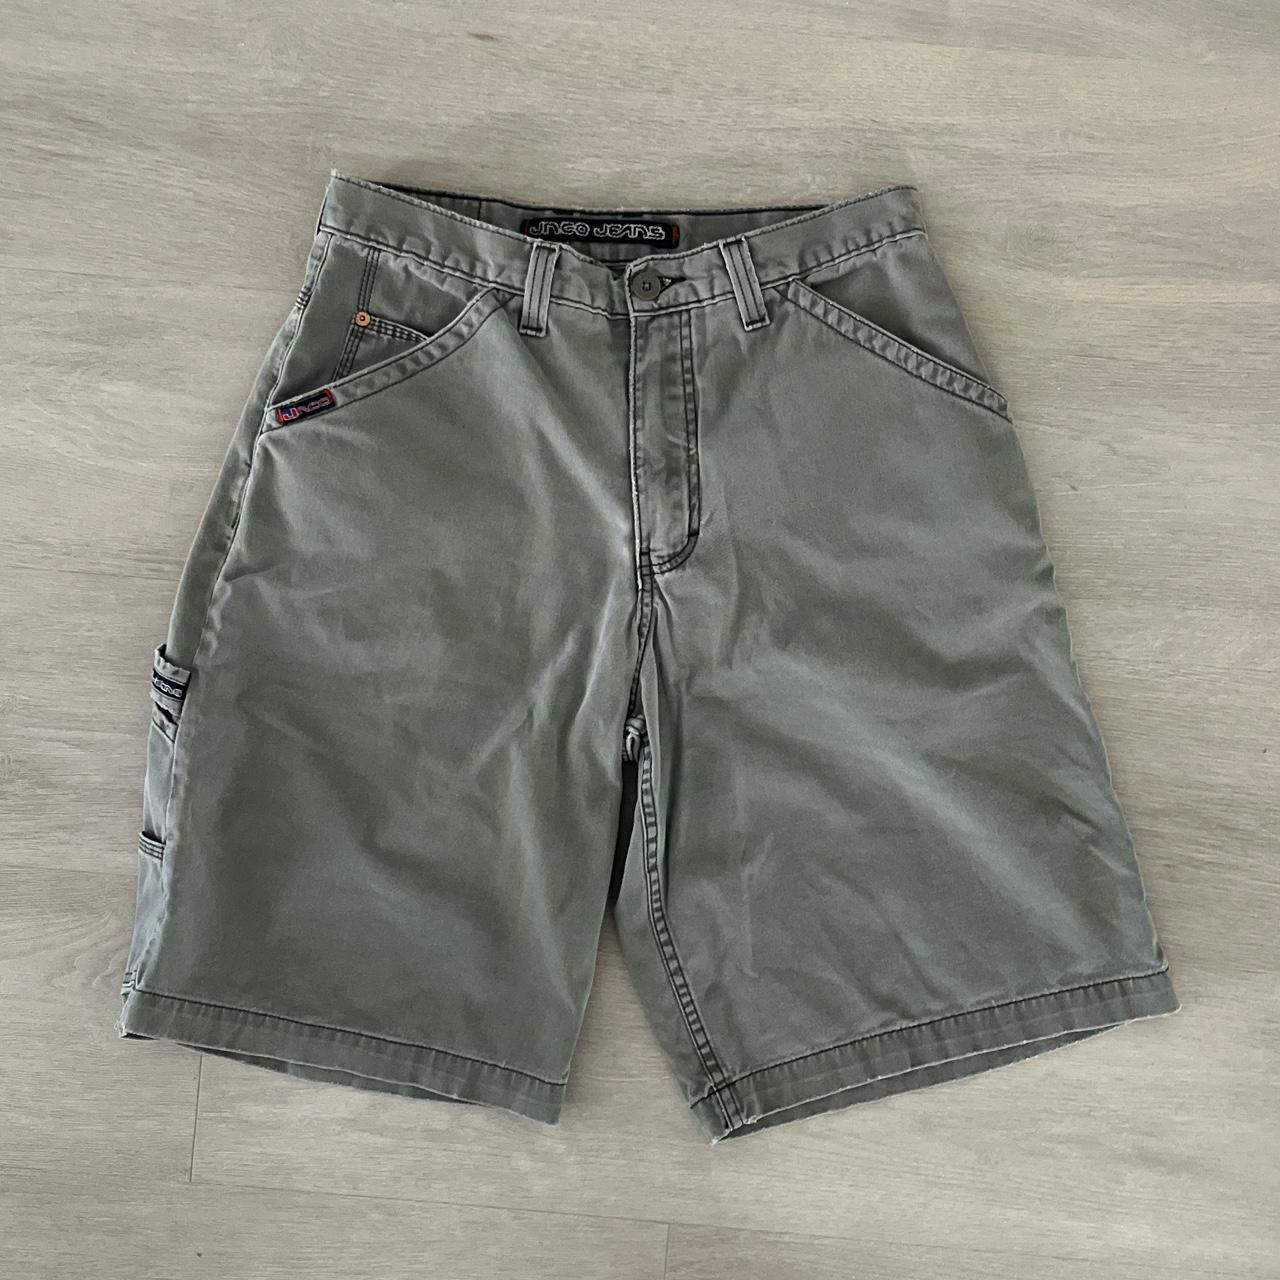 Jnco shorts size 32 very comfortable and hard to... - Depop